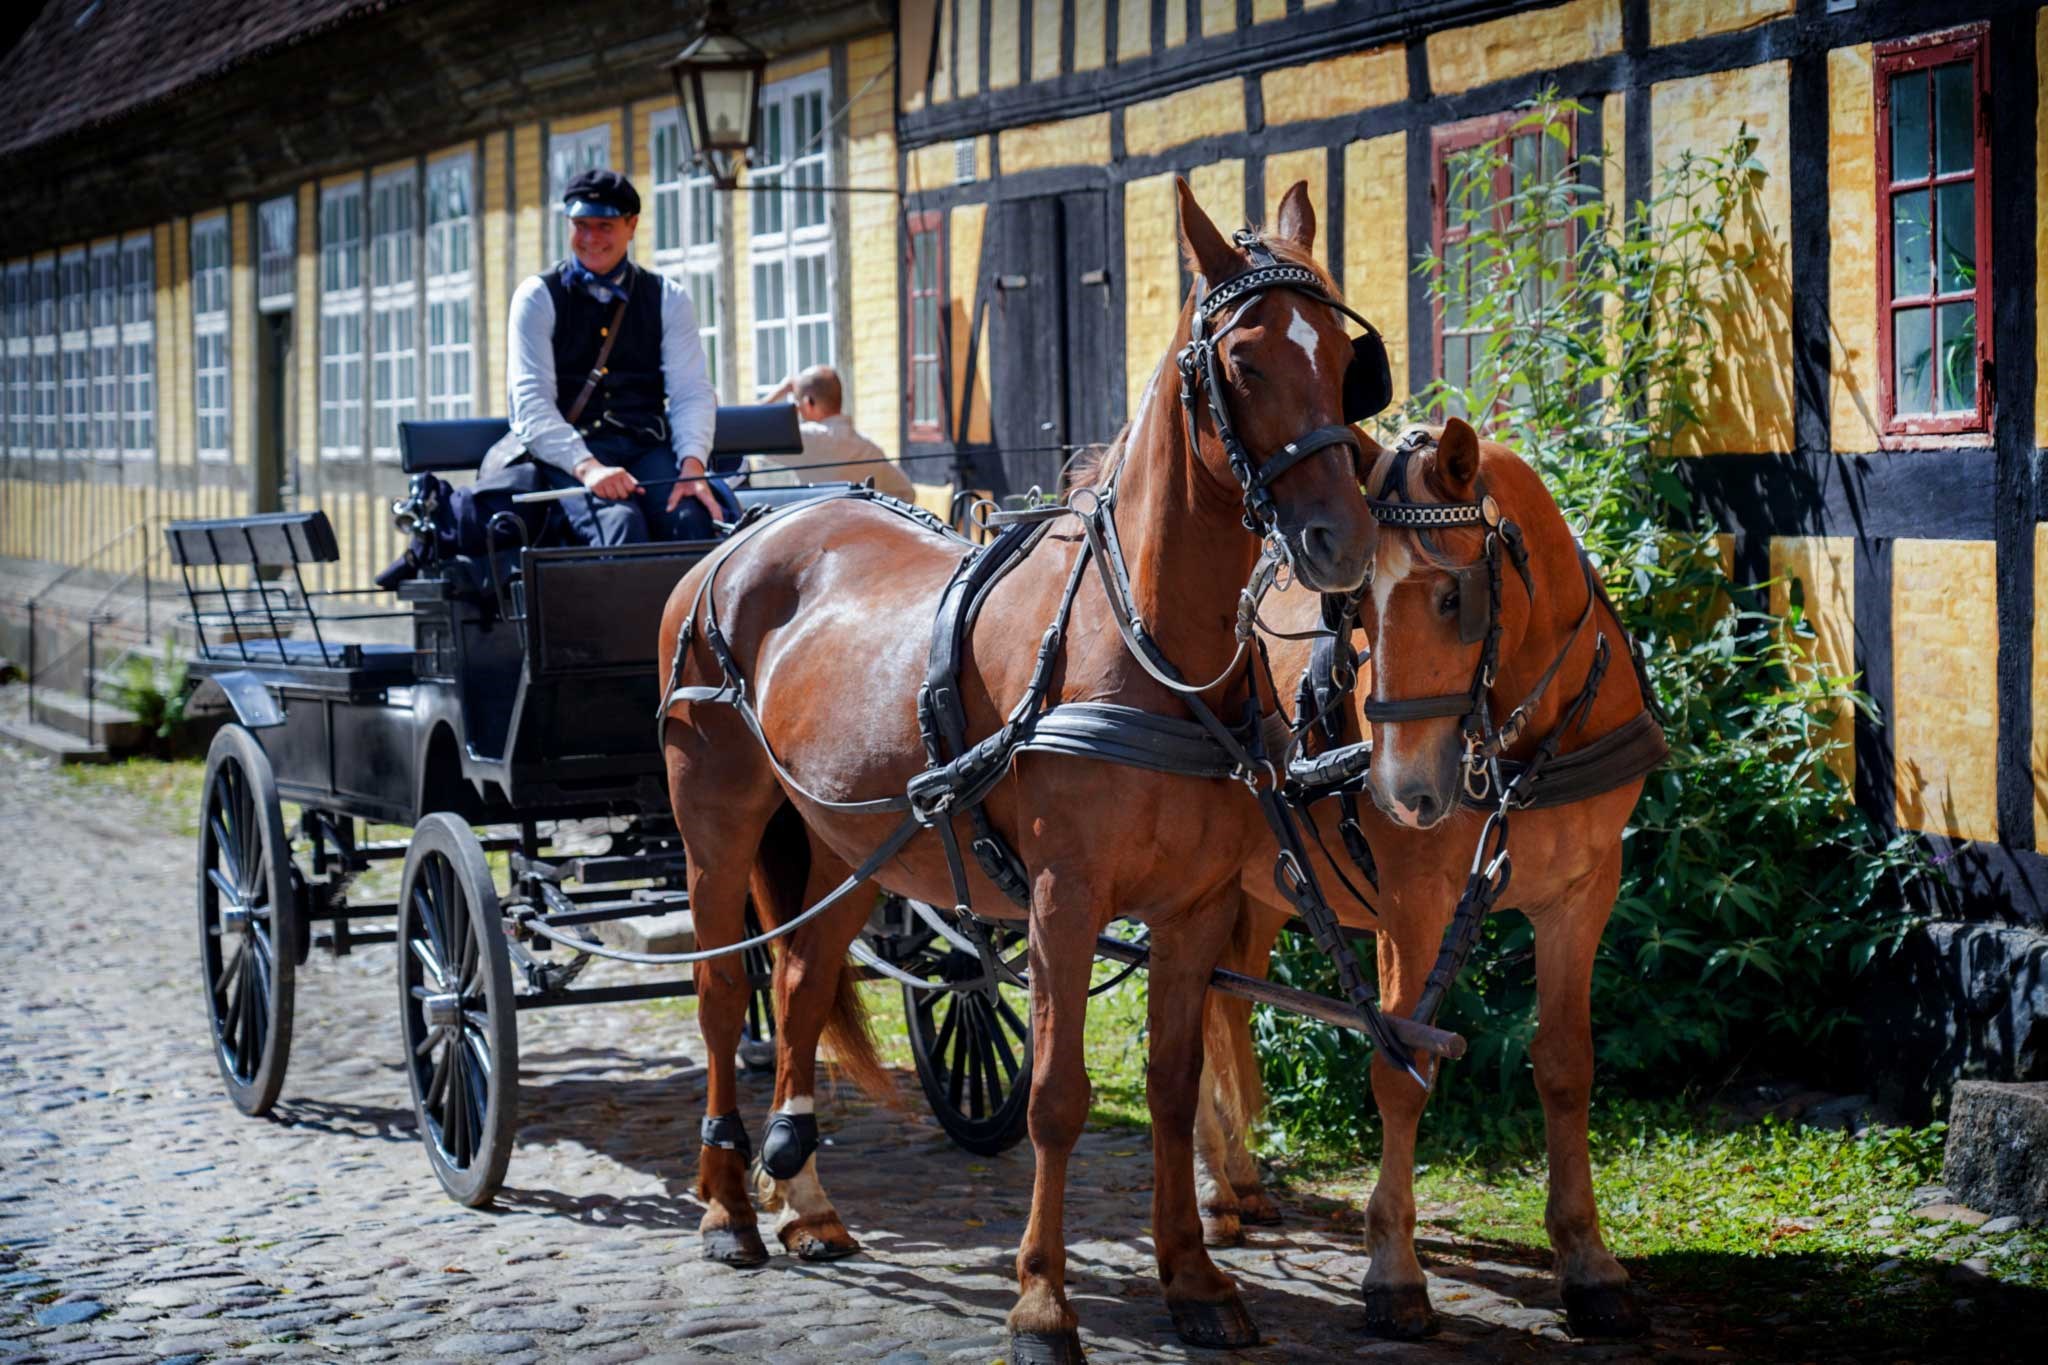 Horse-drawn carriage rides